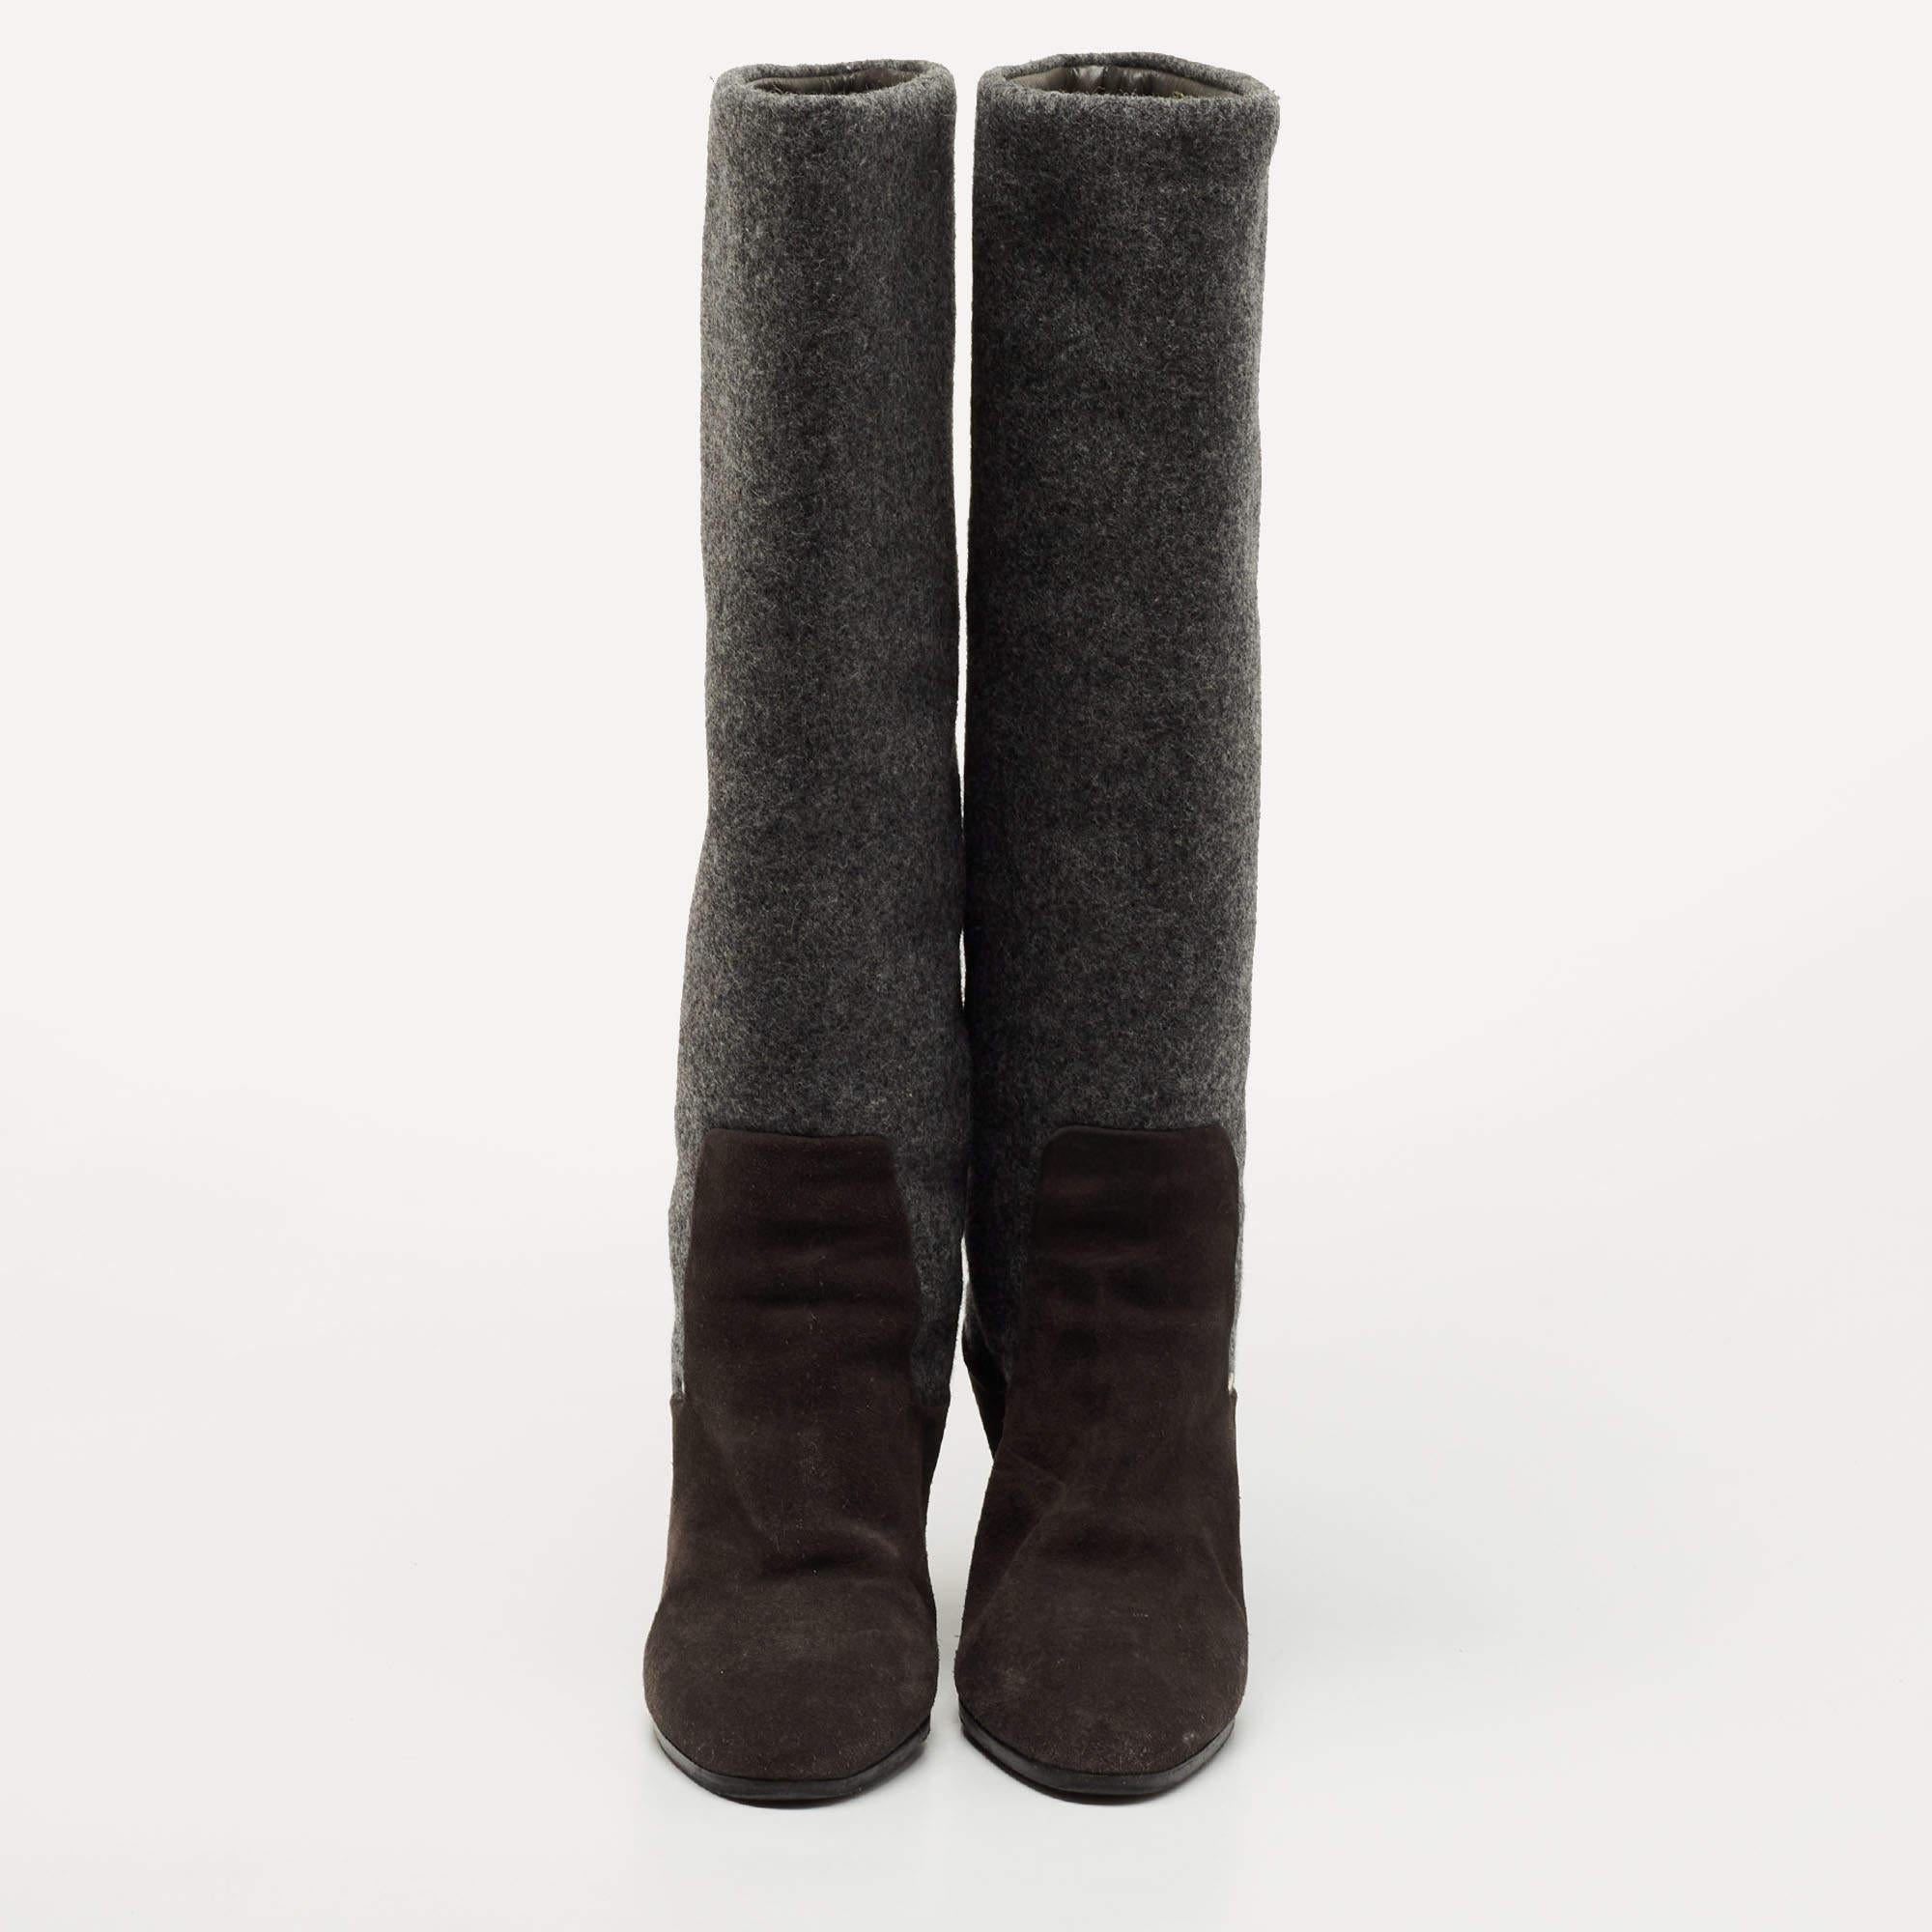 Dior Grey Suede and Wool Wedge Knee Length Boots Size 40.5 In Good Condition For Sale In Dubai, Al Qouz 2